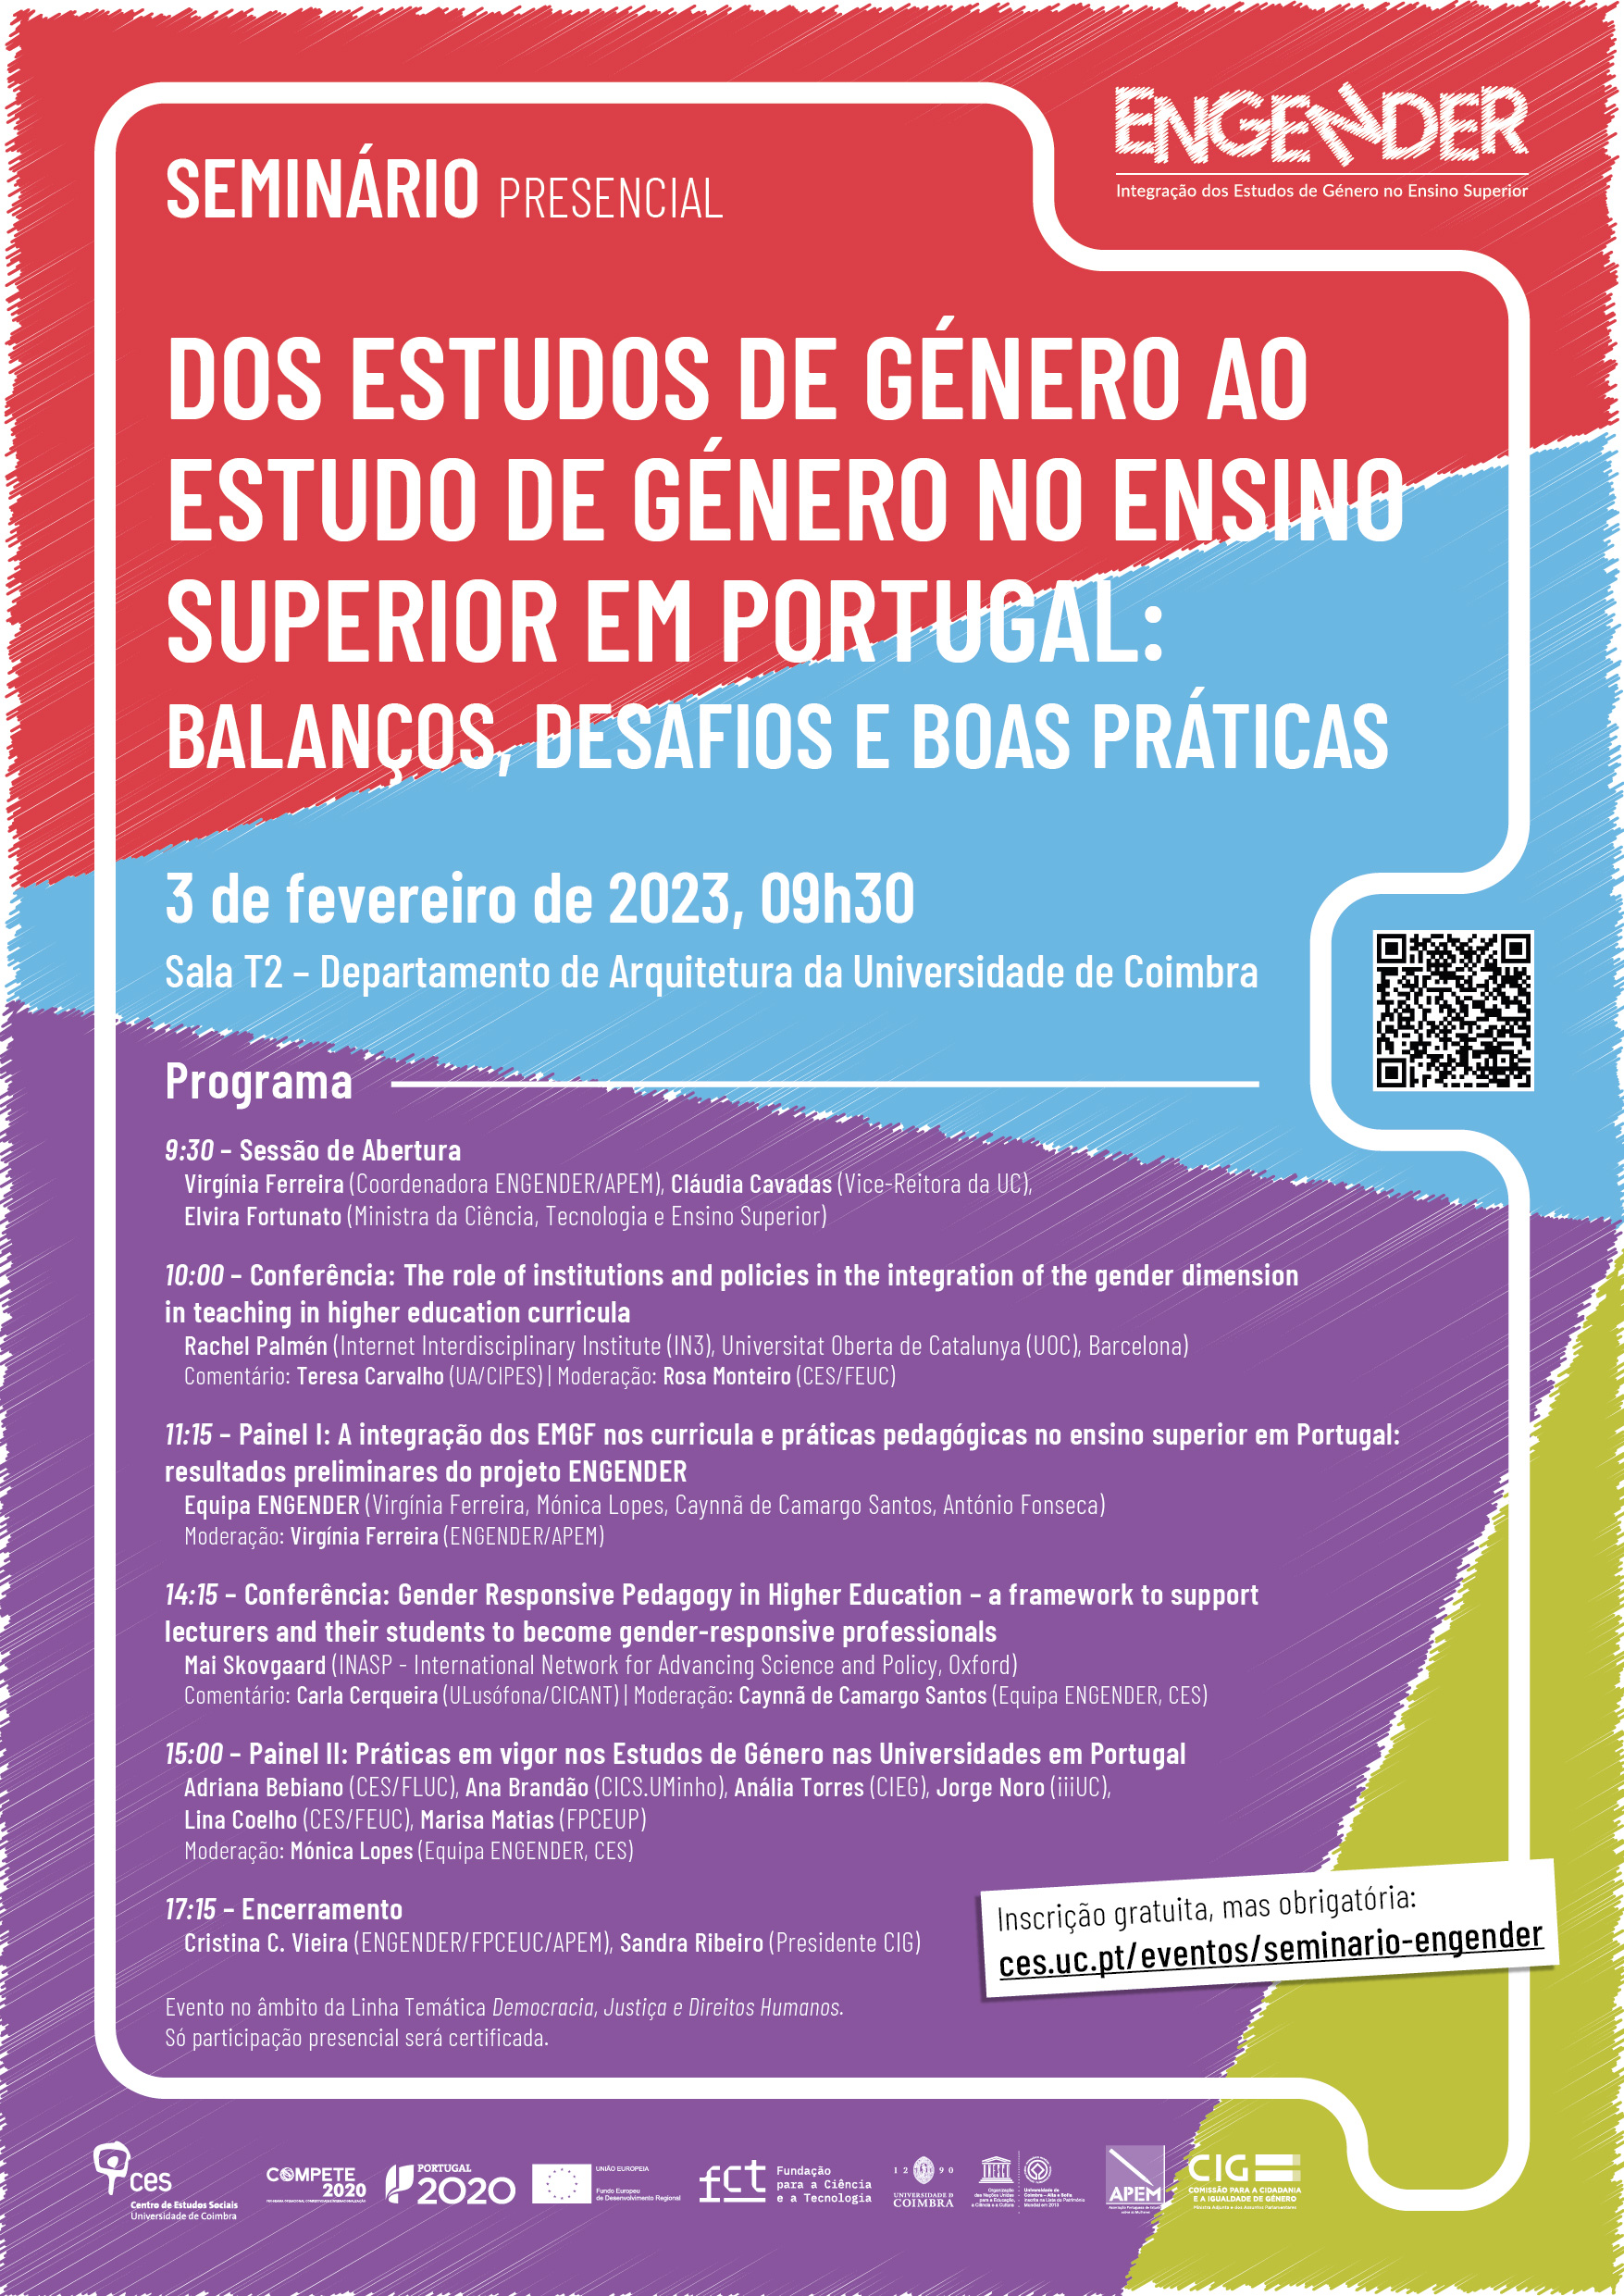 From gender studies to the study on gender in higher education in Portugal: balances, challenges and good practices<span id="edit_41503"><script>$(function() { $('#edit_41503').load( "/myces/user/editobj.php?tipo=evento&id=41503" ); });</script></span>